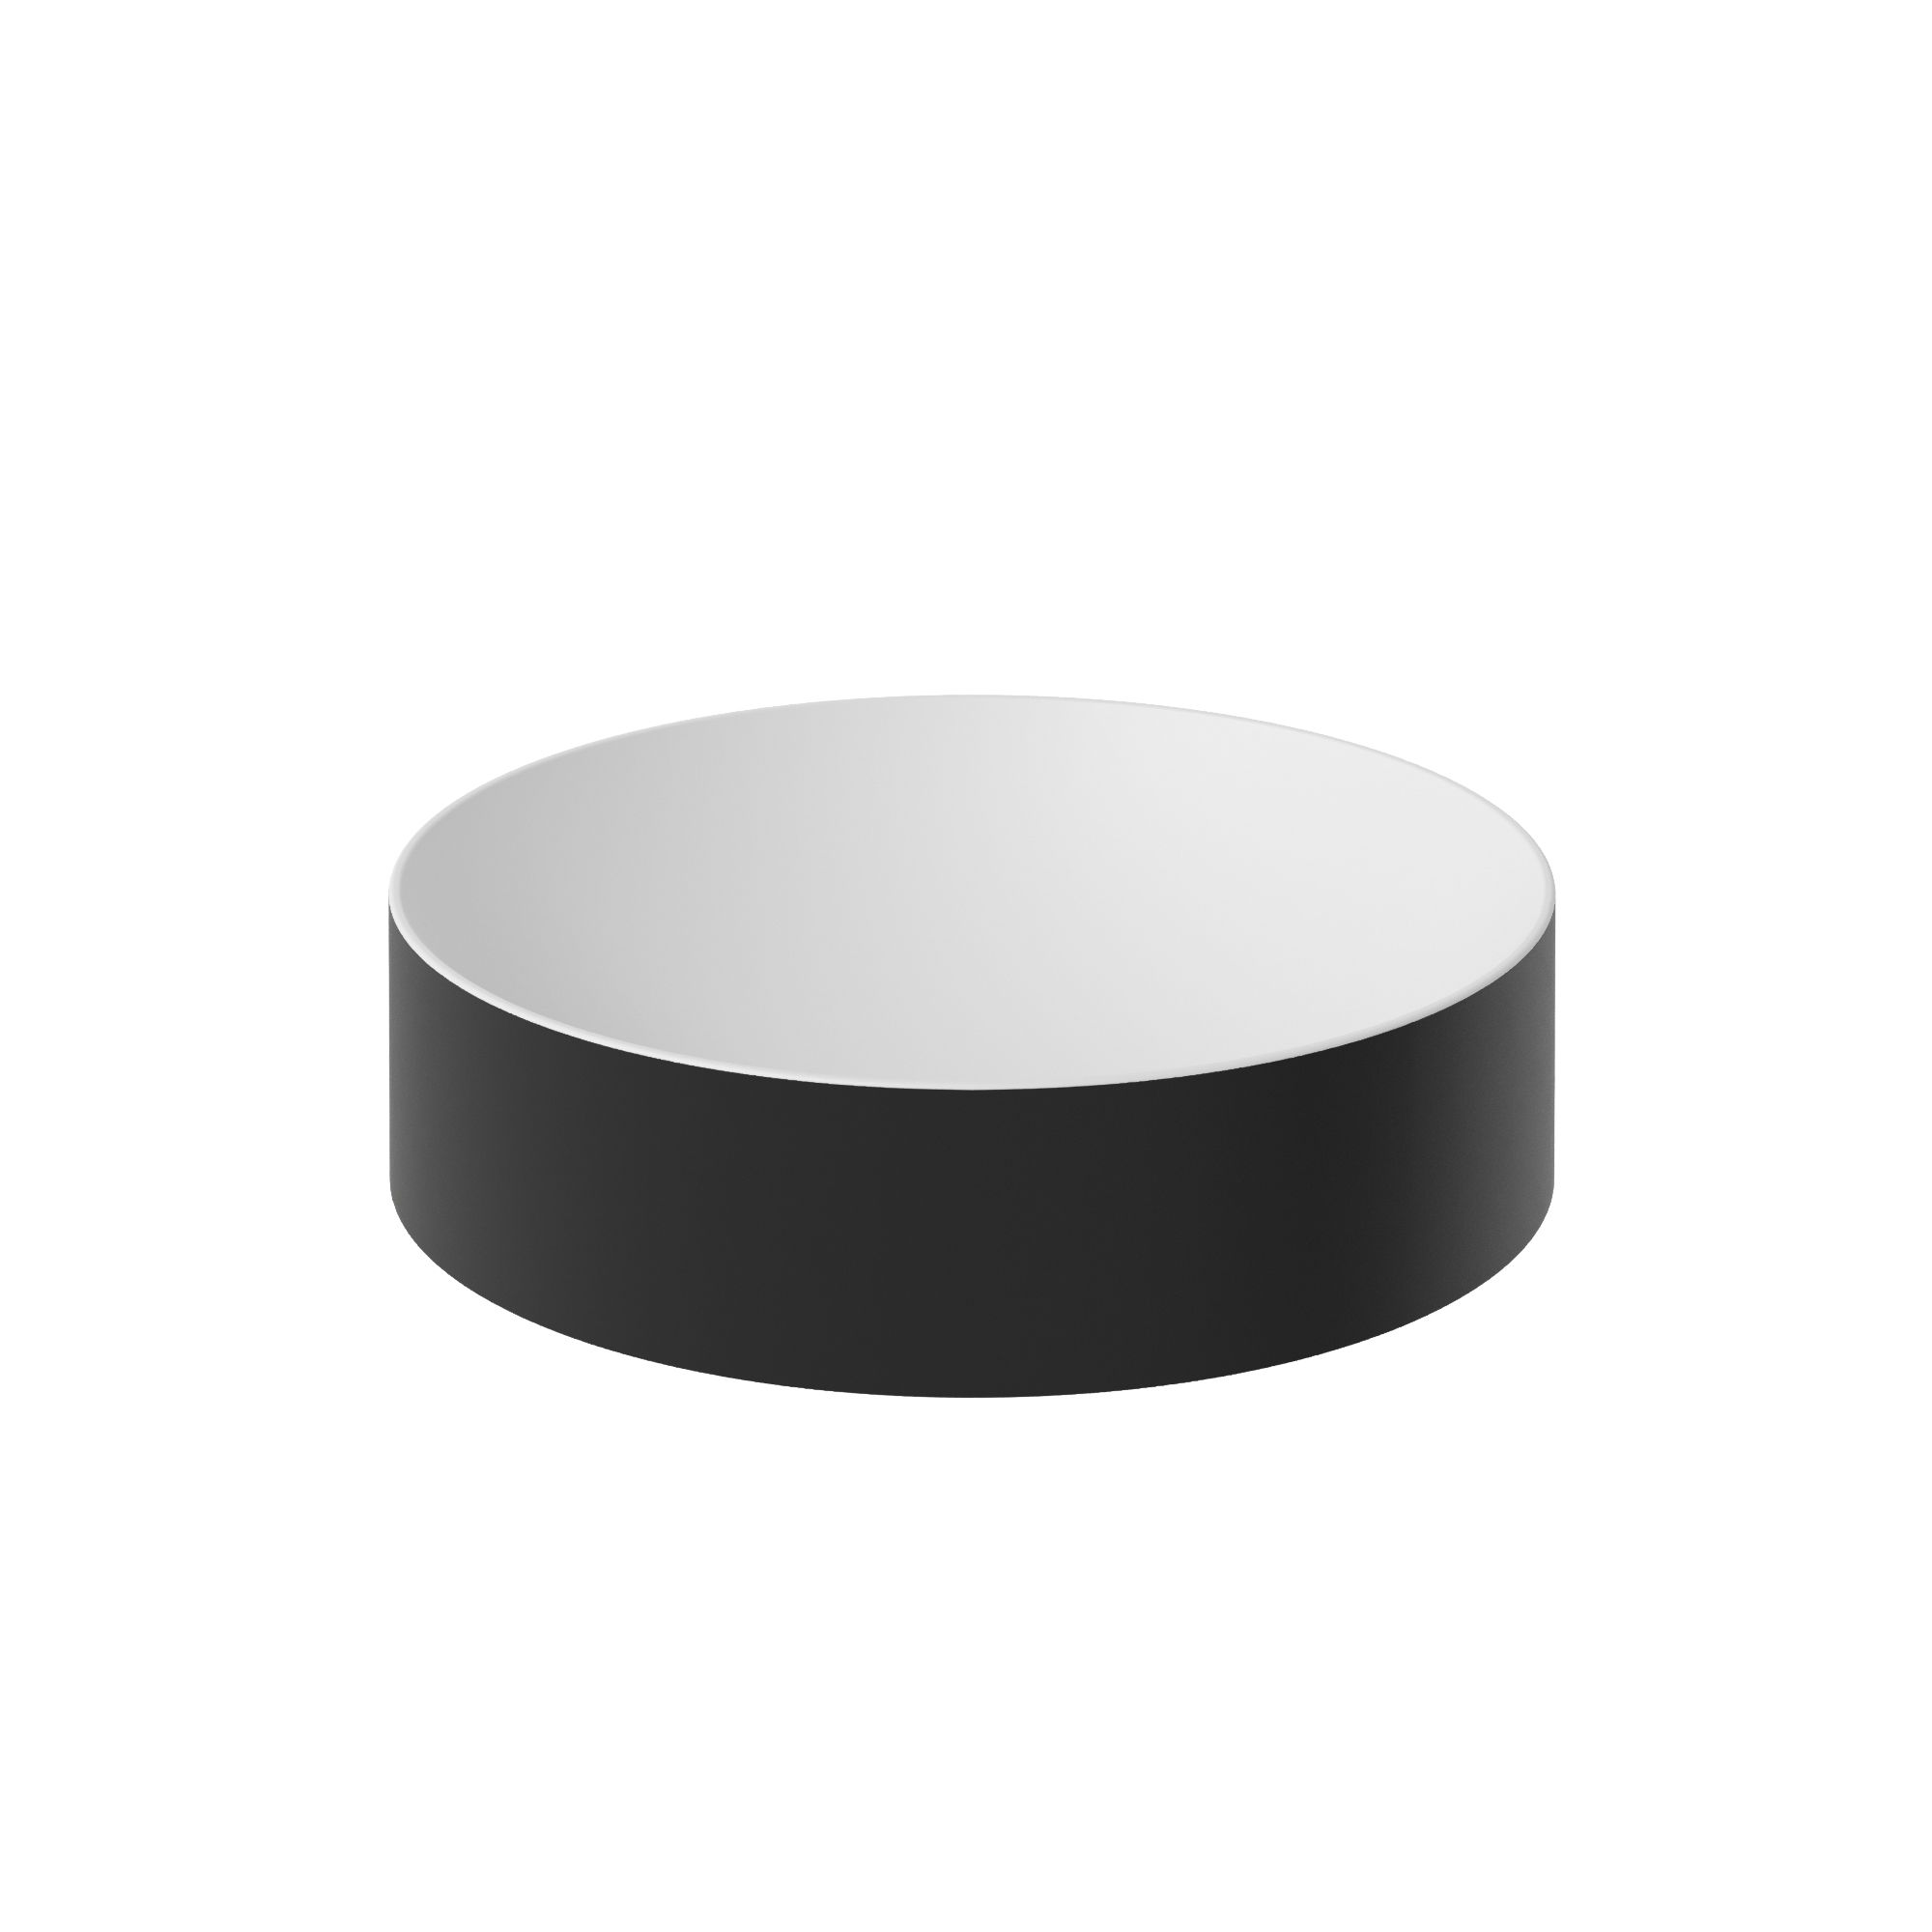 The Maia Countertop Basin 400x400mm Round